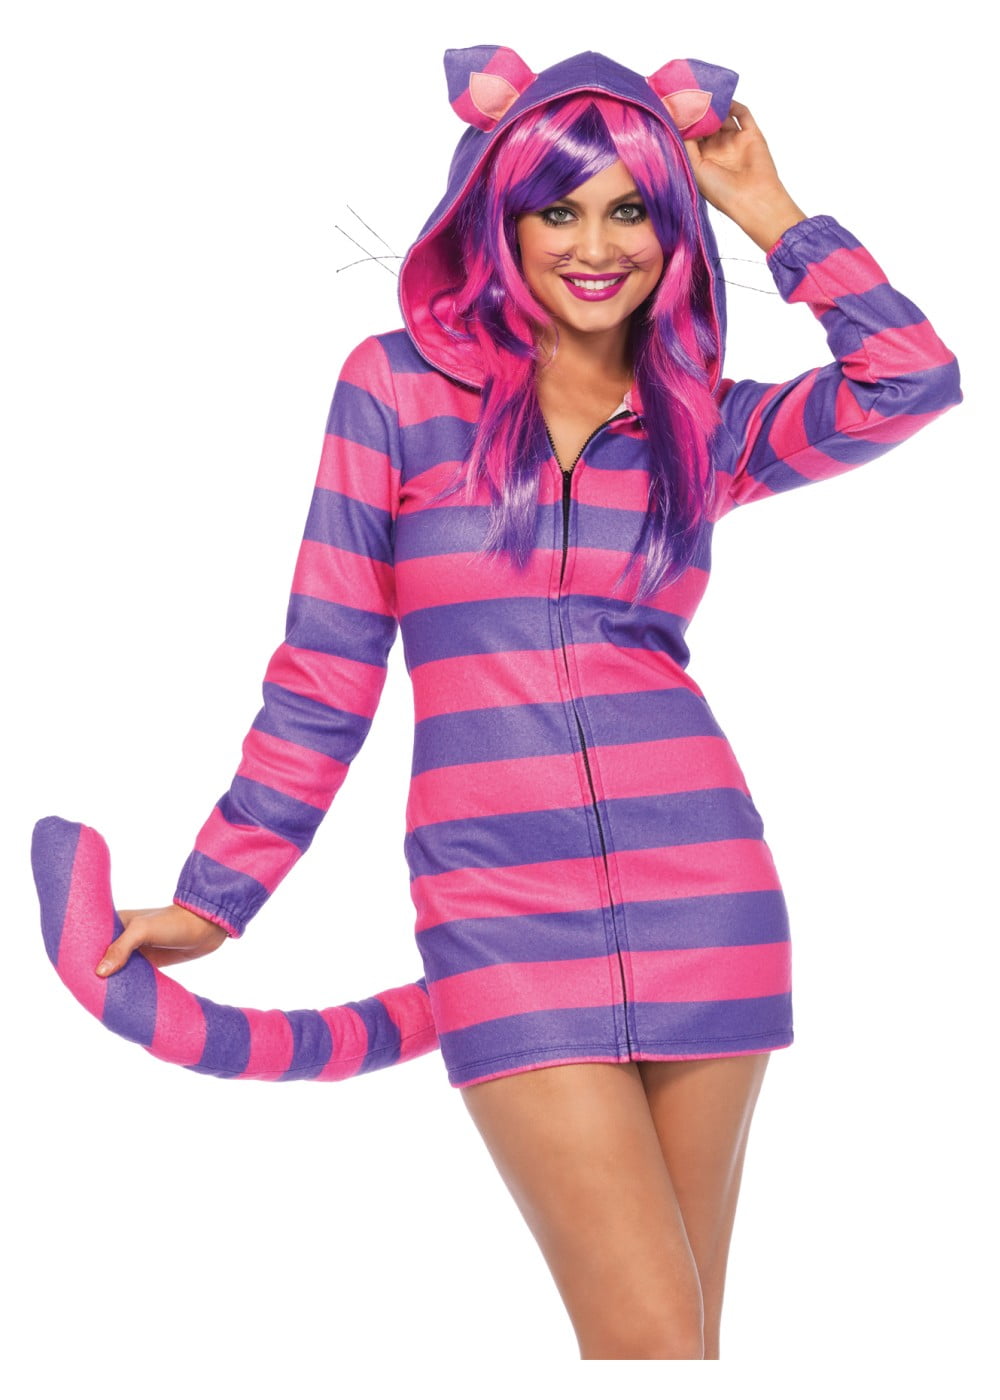 ADULT LADIES CHESHIRE CAT COSTUME ALICE IN WONDERLAND KITTY FANCY DRESS OUTFIT 